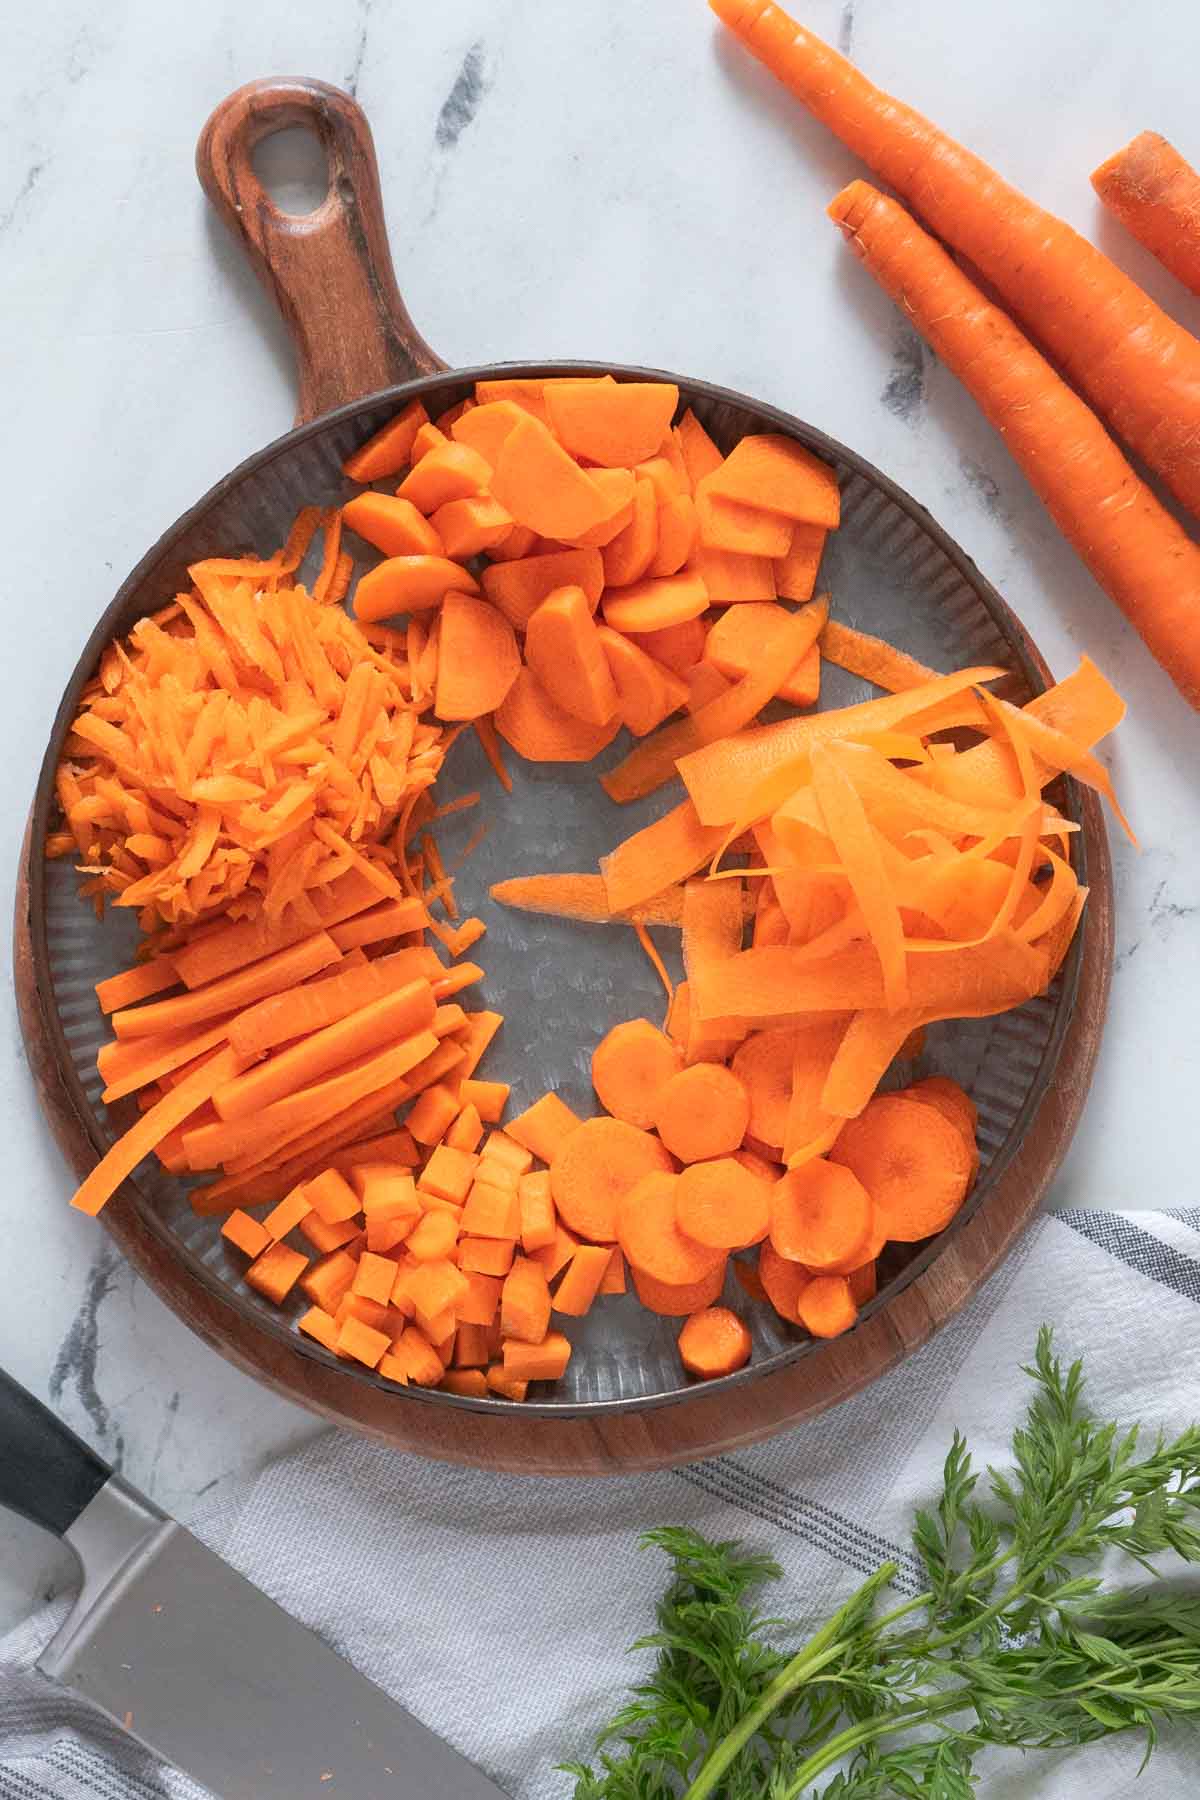 https://www.peelwithzeal.com/wp-content/uploads/2023/01/how-to-cut-carrots-salad.jpg